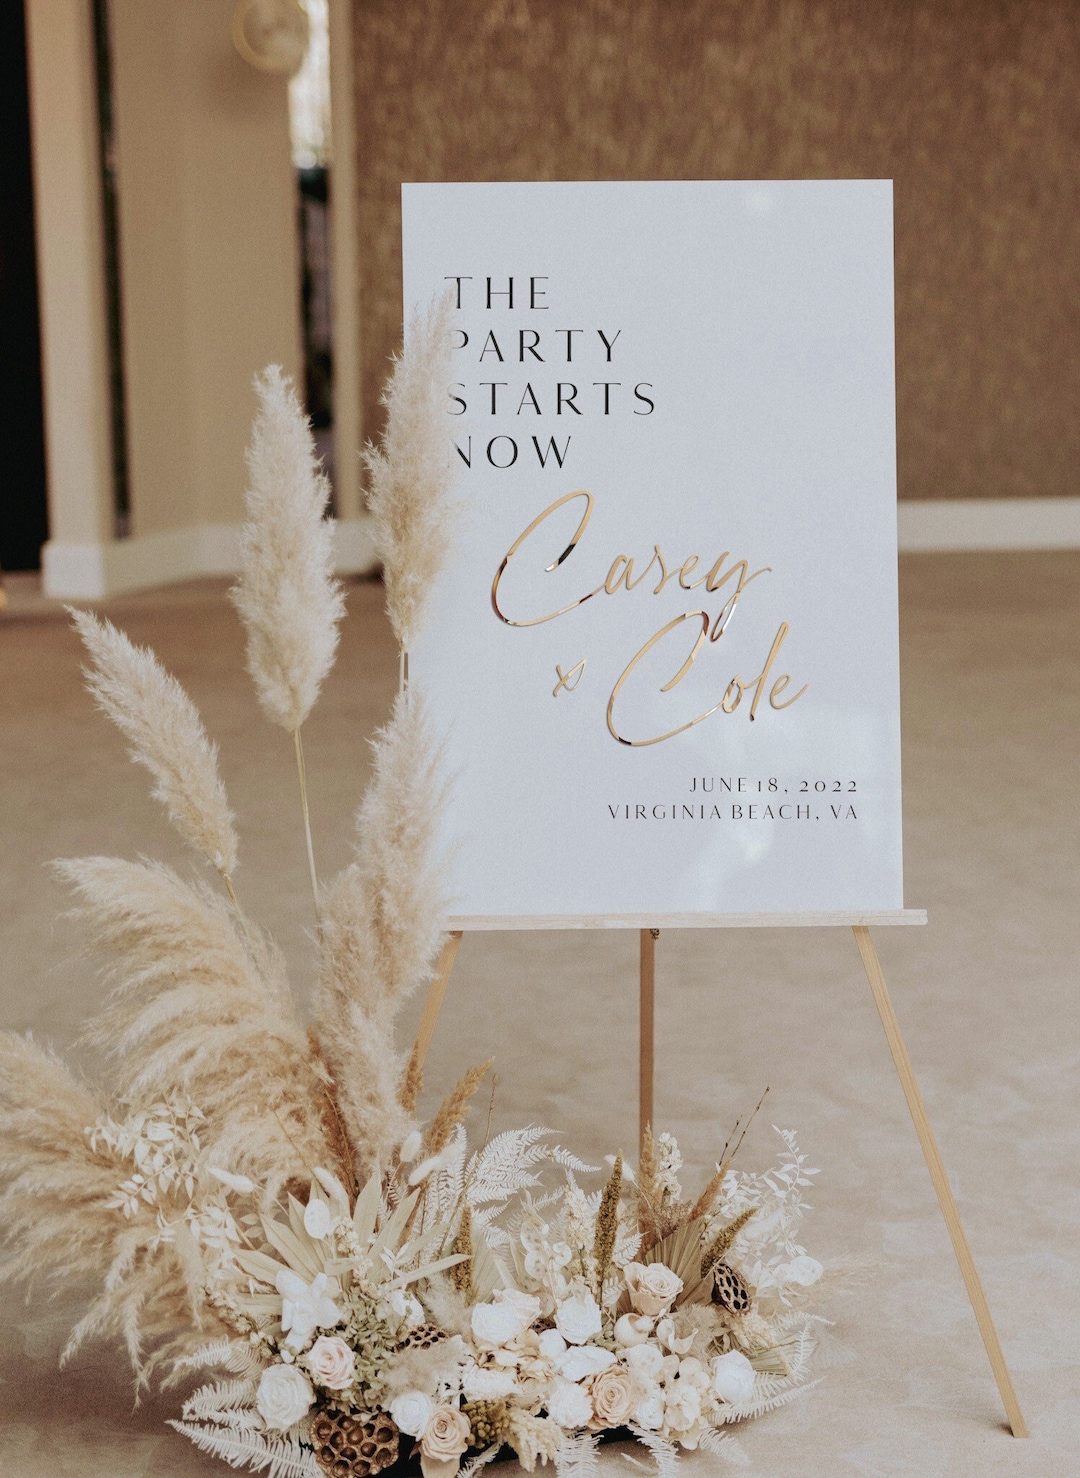 Lauren Conrad Launches Fine Jewelry and Handbags, and Dishes on Push  Presetns